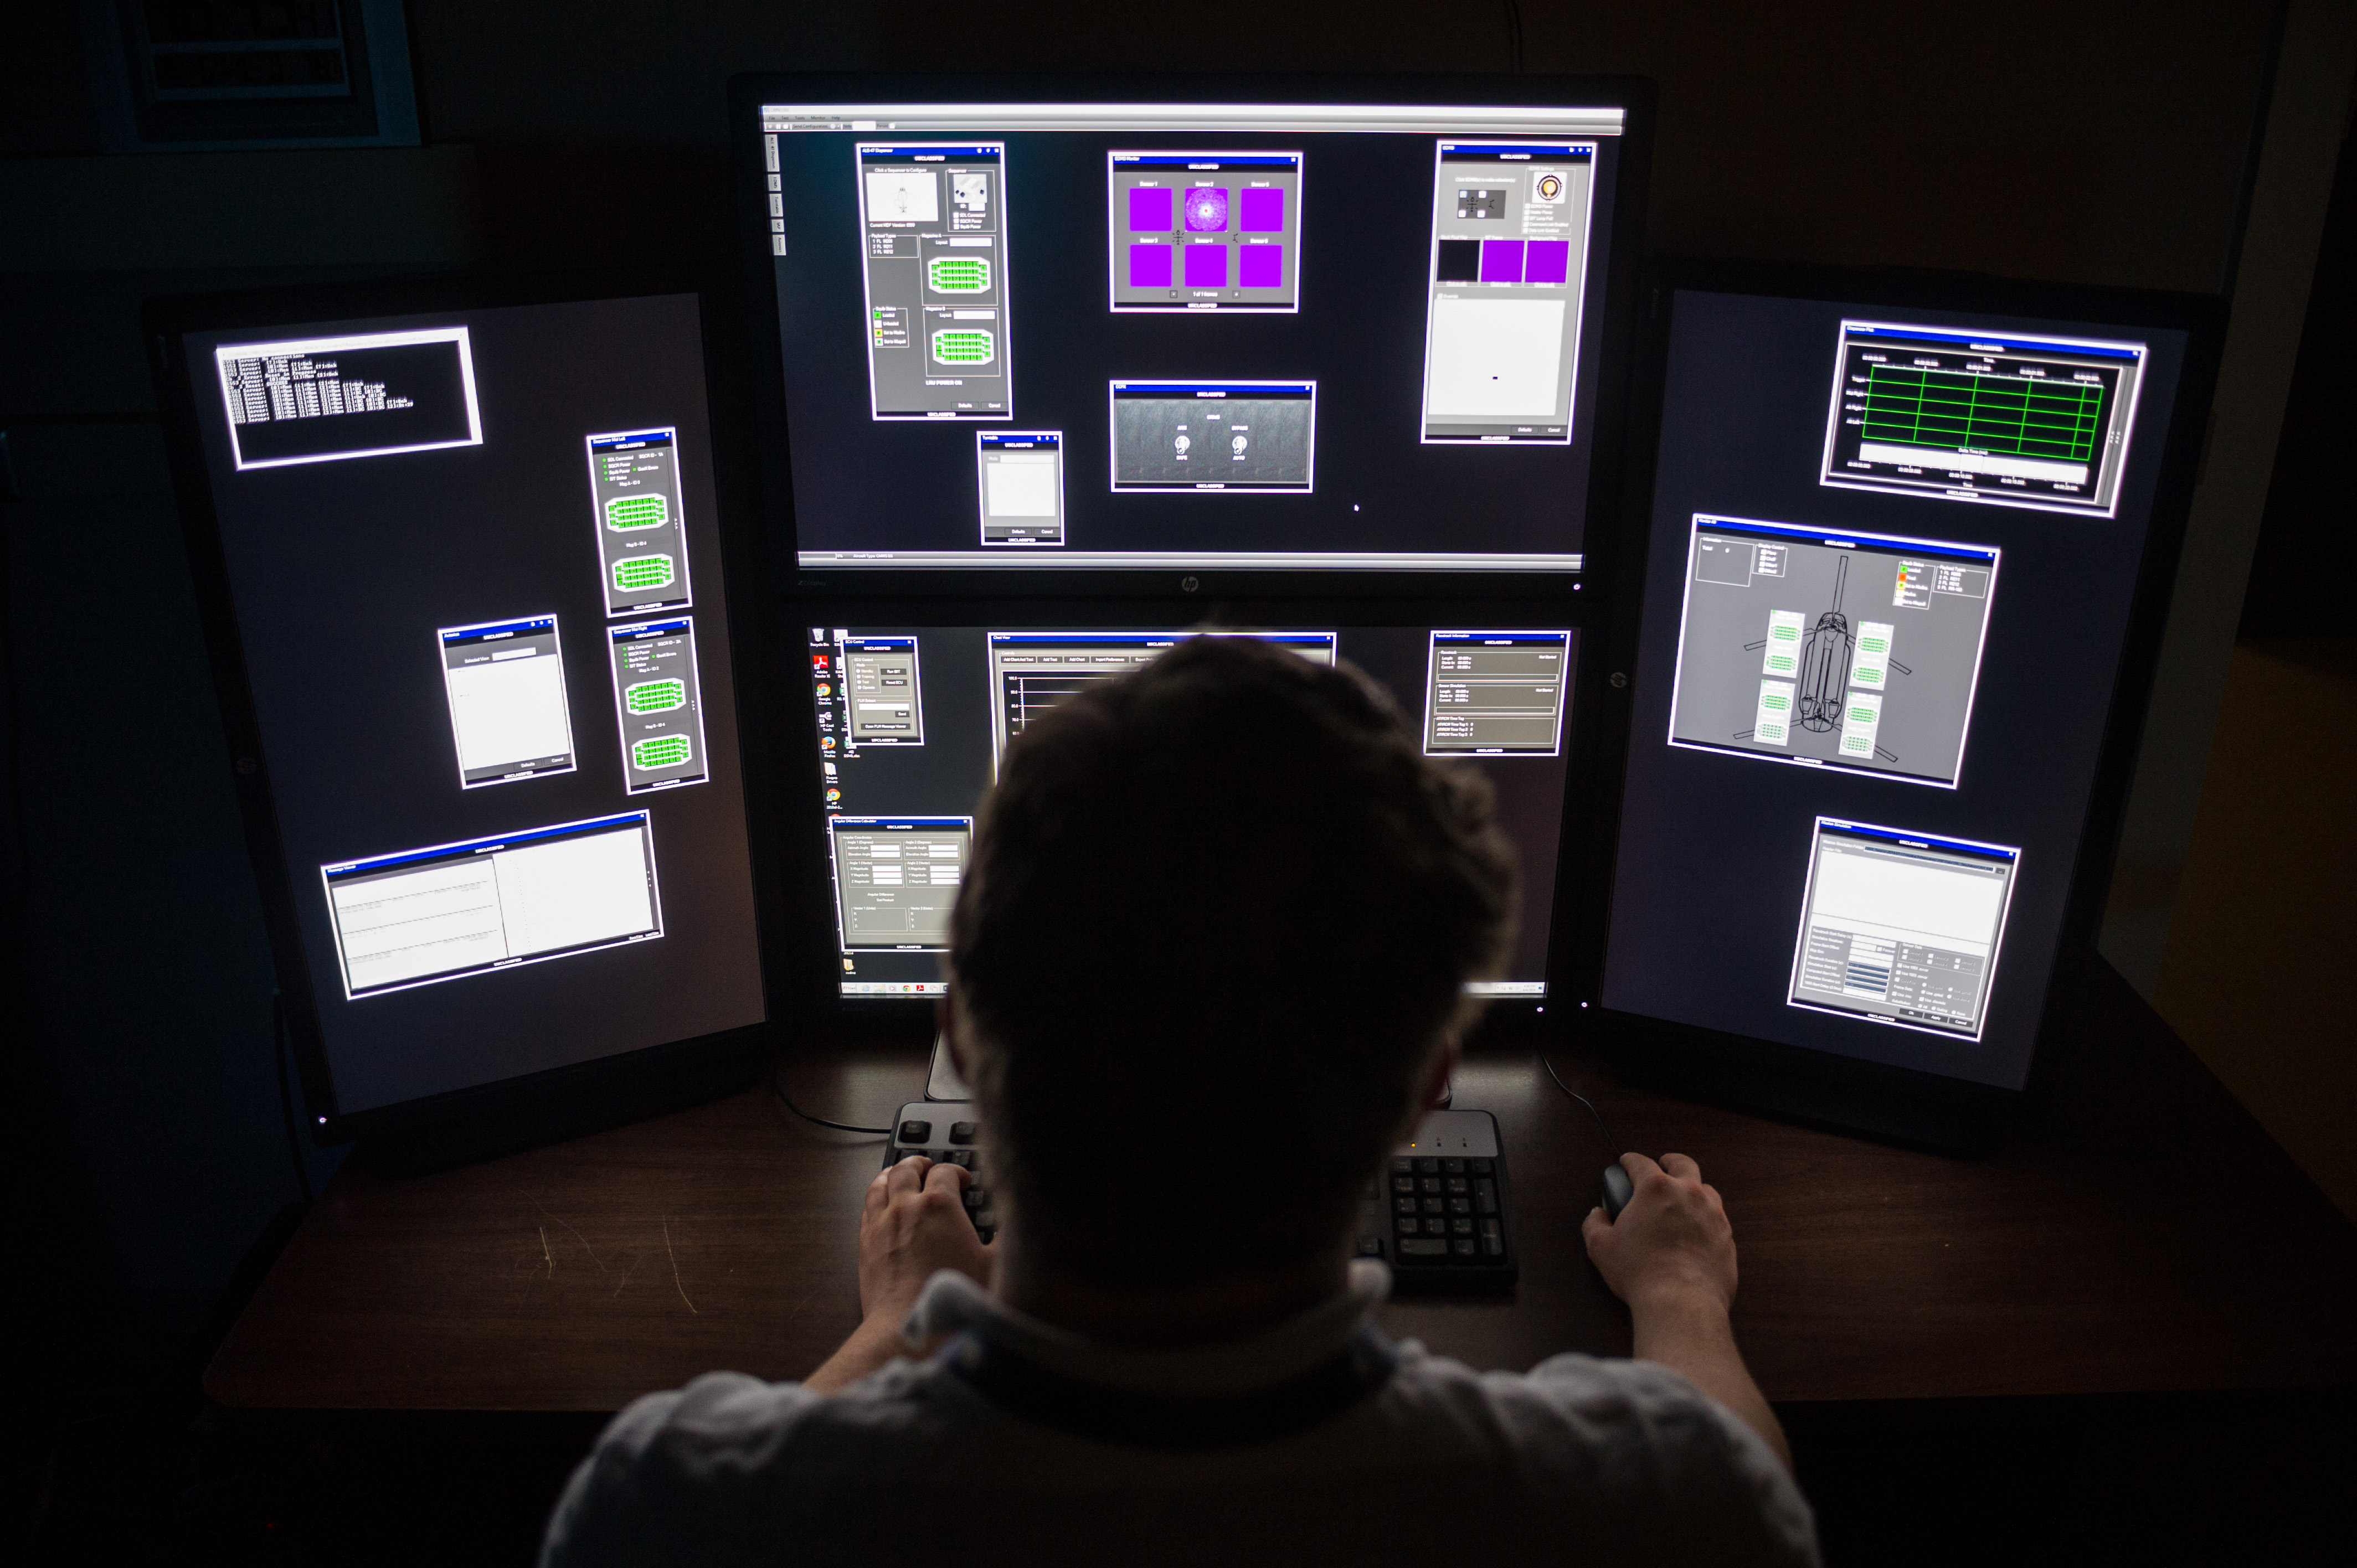 GTRI researcher Nicholas Rodine monitors testing on the screens of the AN/AAR-57 integrated support station. GTRI and the Army Reprogramming Analysis Team (ARAT) have developed and built a new ISS for testing AN/AAR-57 software updates. (Photo: Rob Felt)